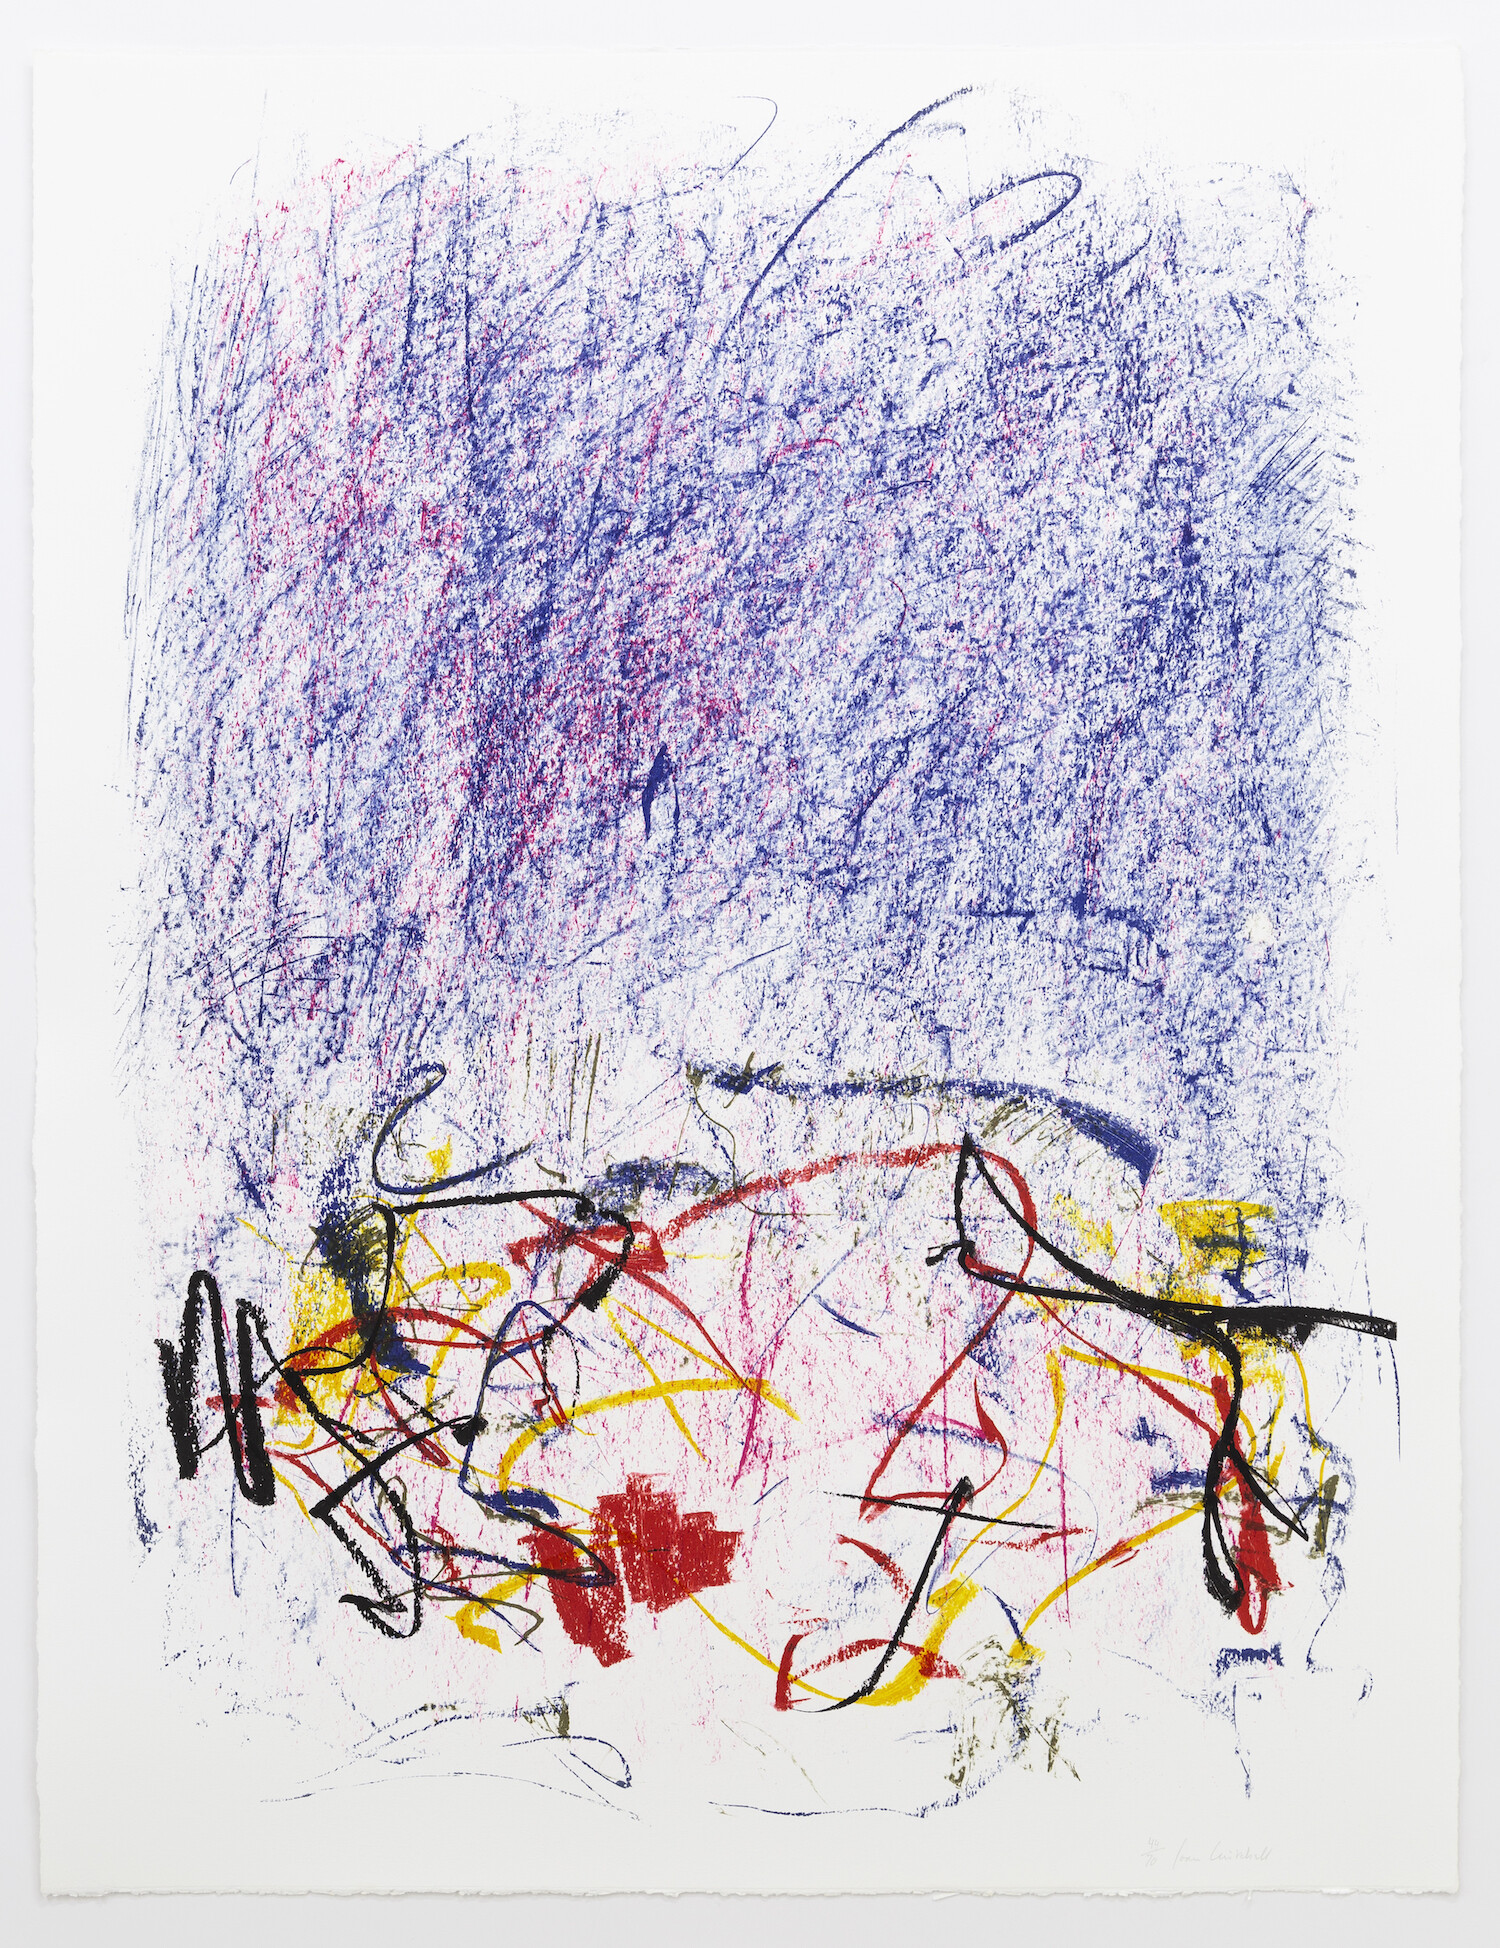 Joan Mitchell Bedford I, 1981 Lithograph 42 1/2 x 32 1/2 inches (108 x 82.6 cm) Edition of 70